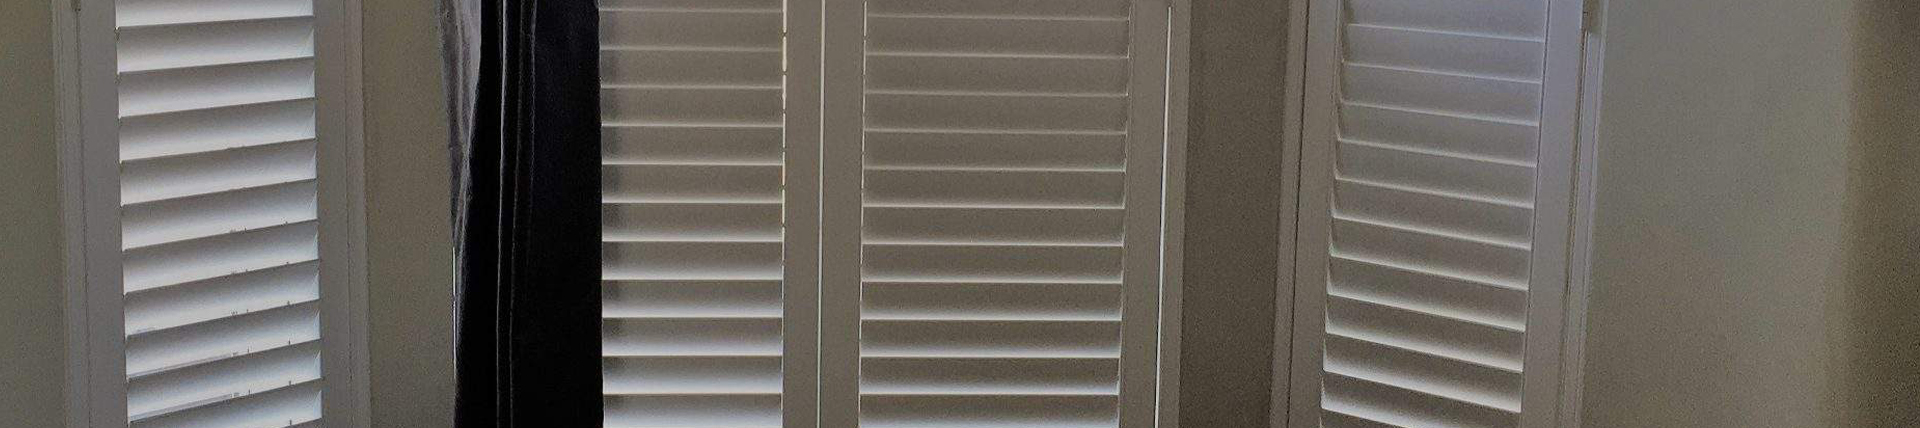 Made to Measure Café Style Shutters for Every Window